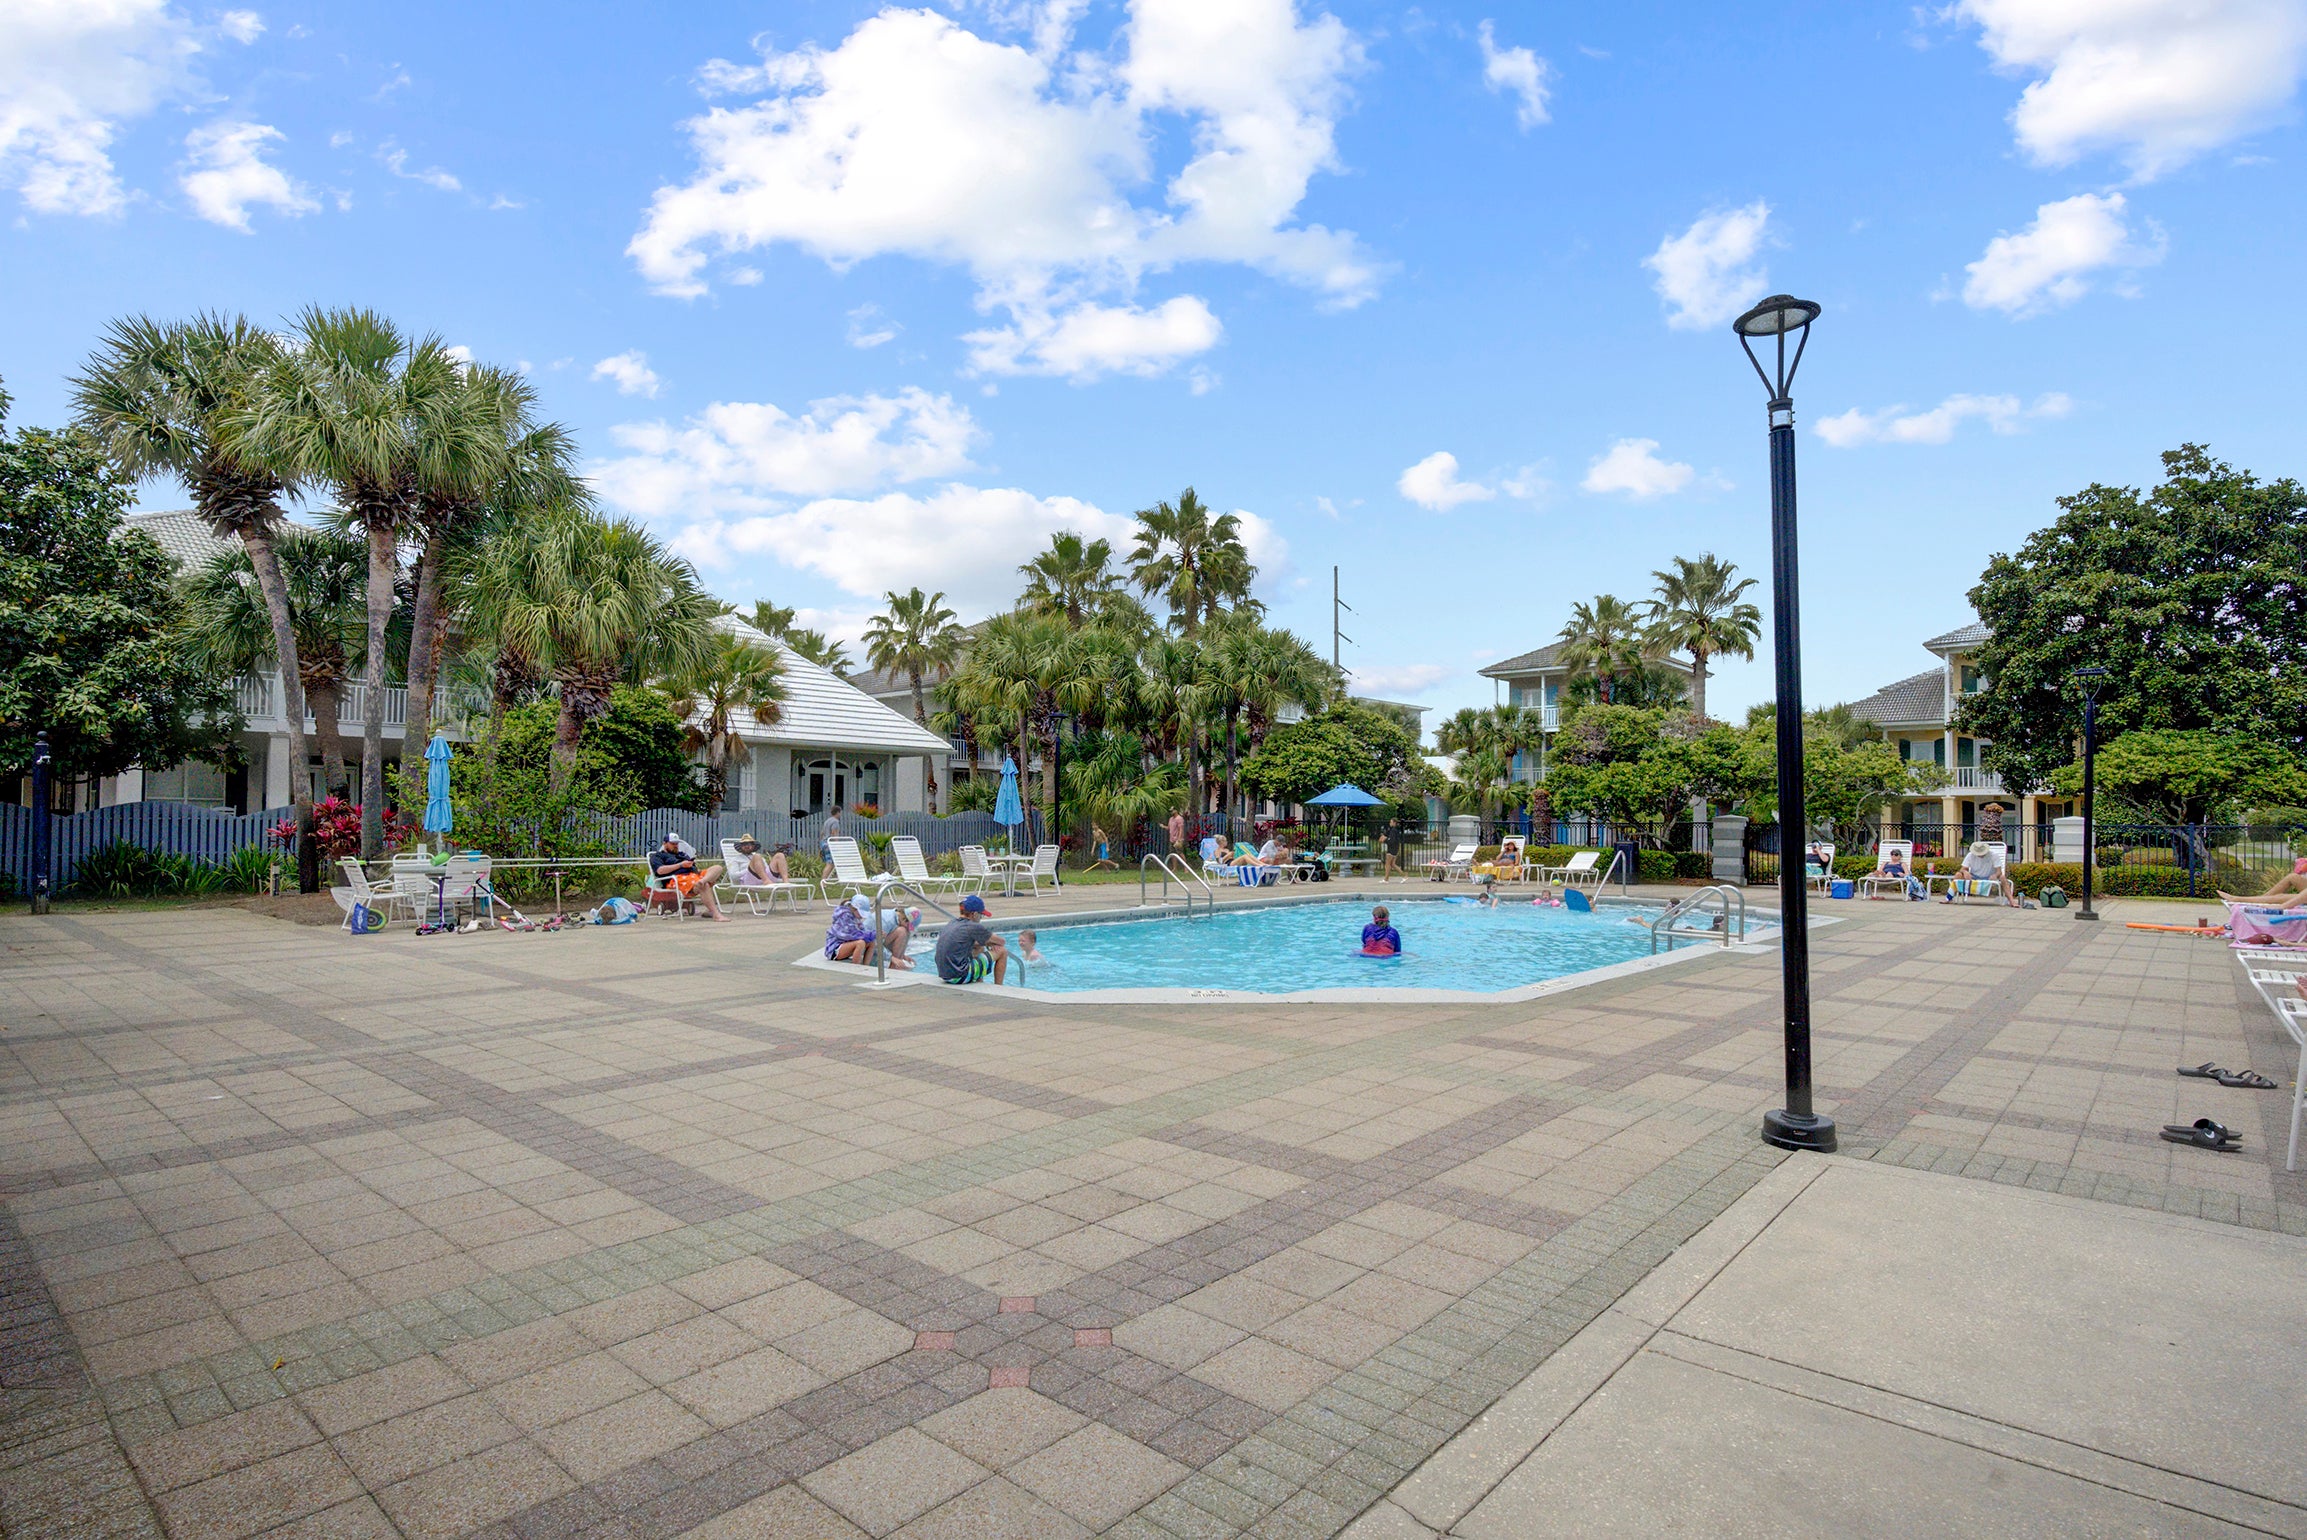 One of the pools at Emerald Shores